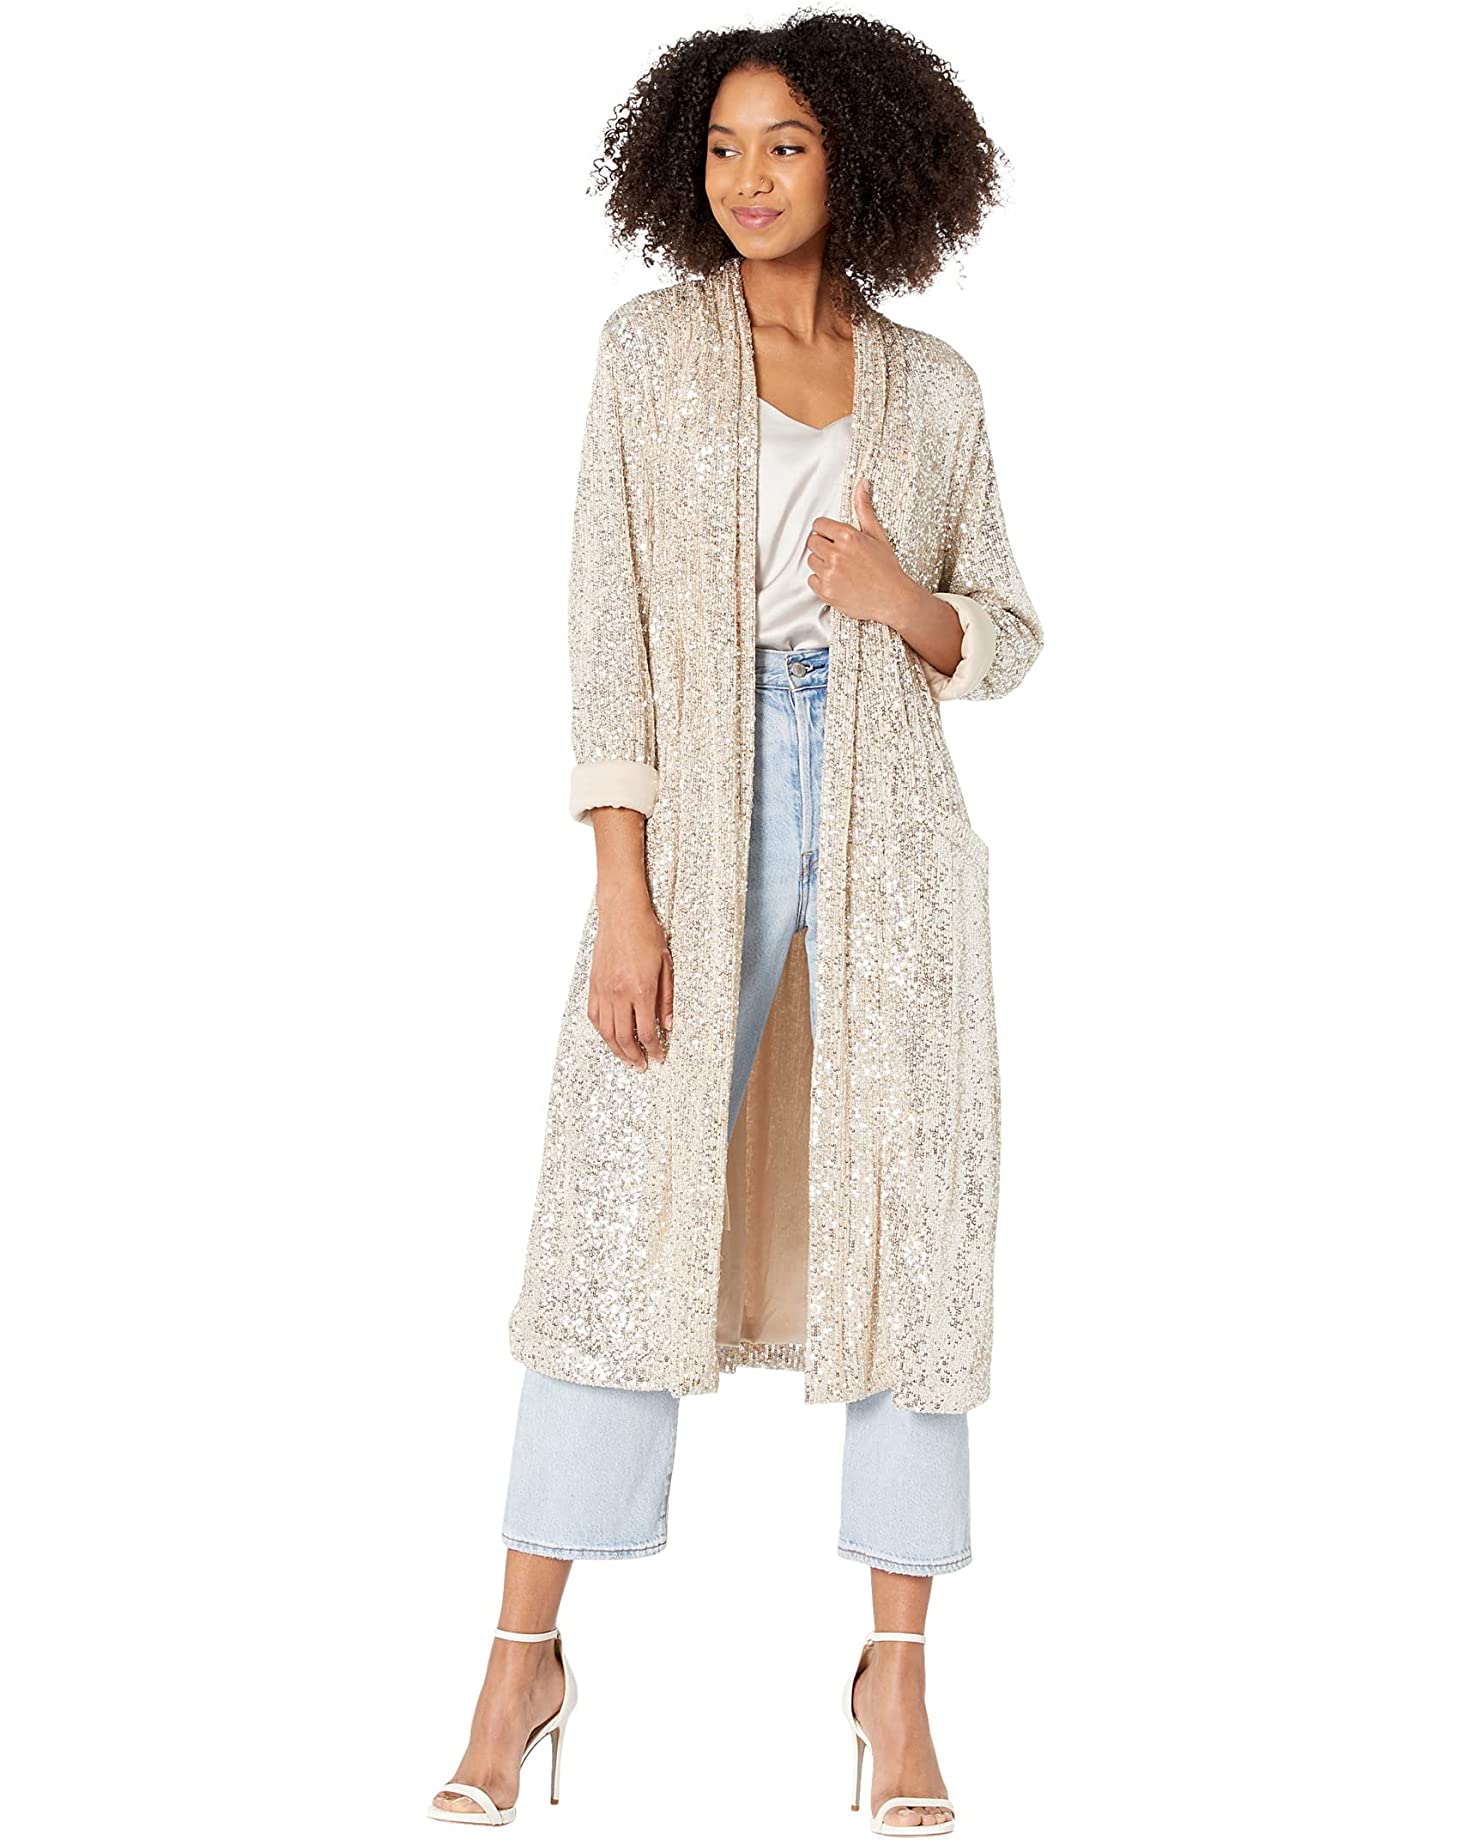 The Show Stopper Sequin Duster- BB Dakota – Serendipity House of Style